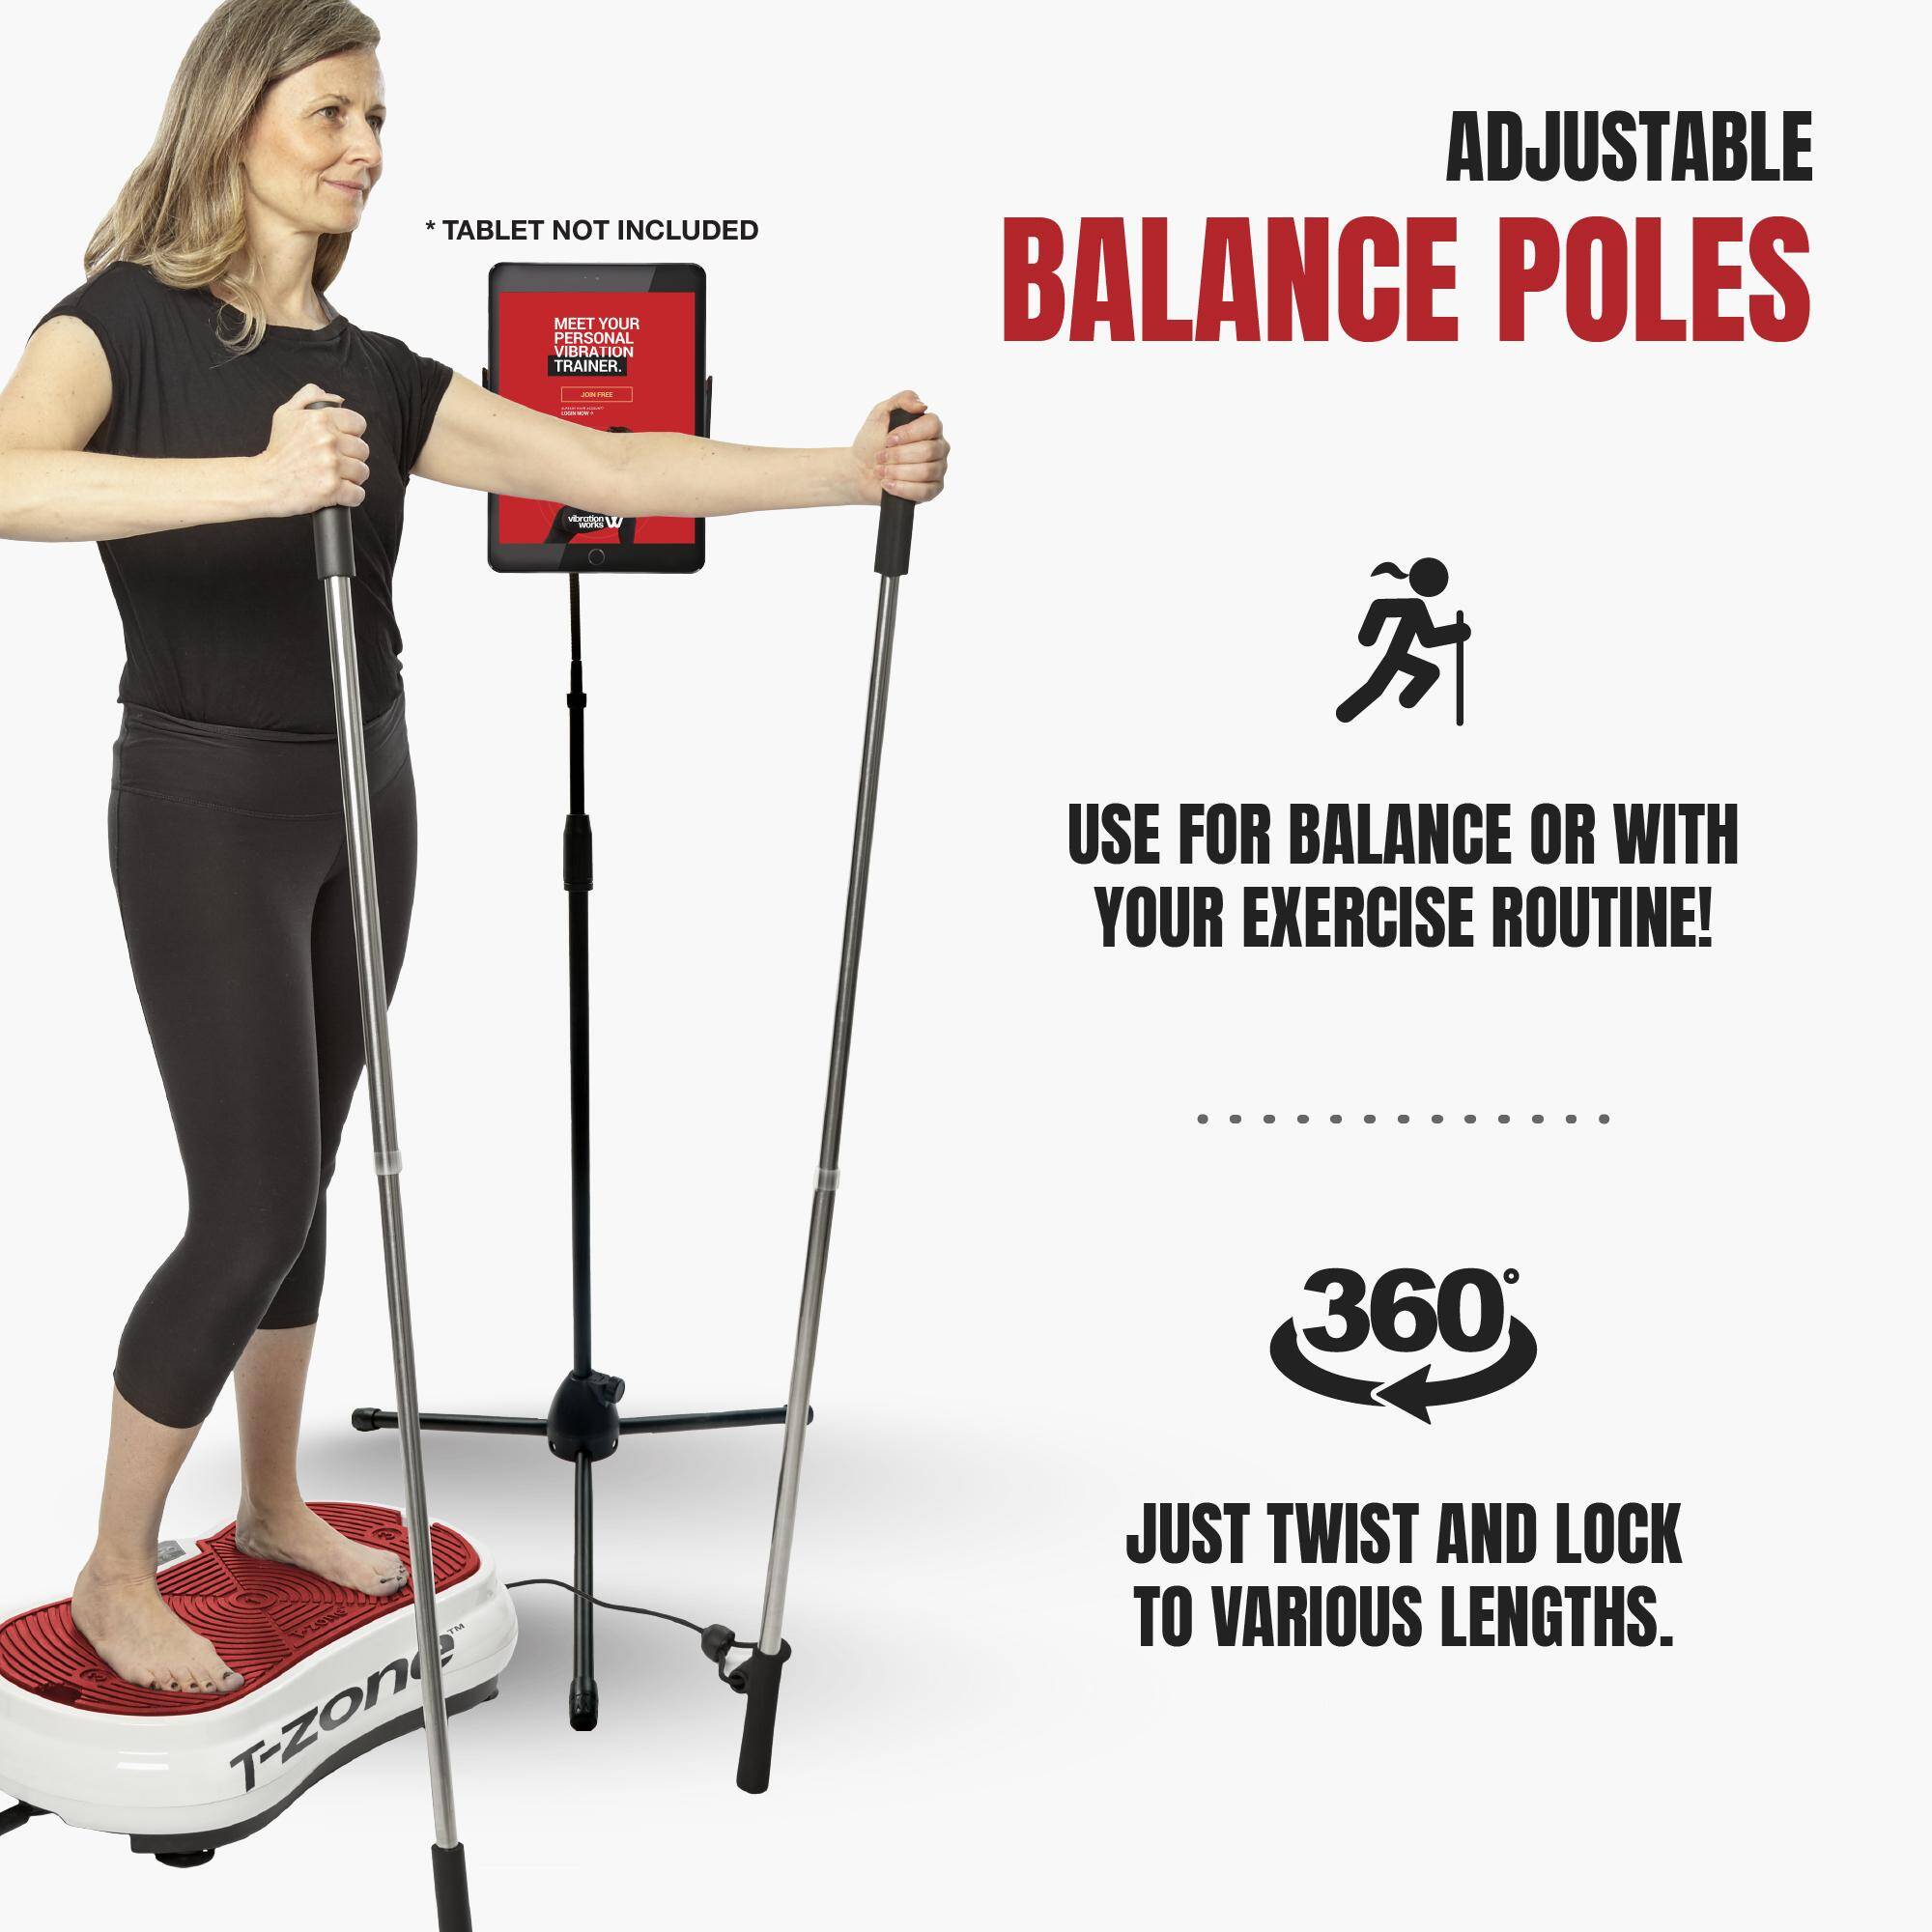 He 90 Vibration Plate Exercise Machine